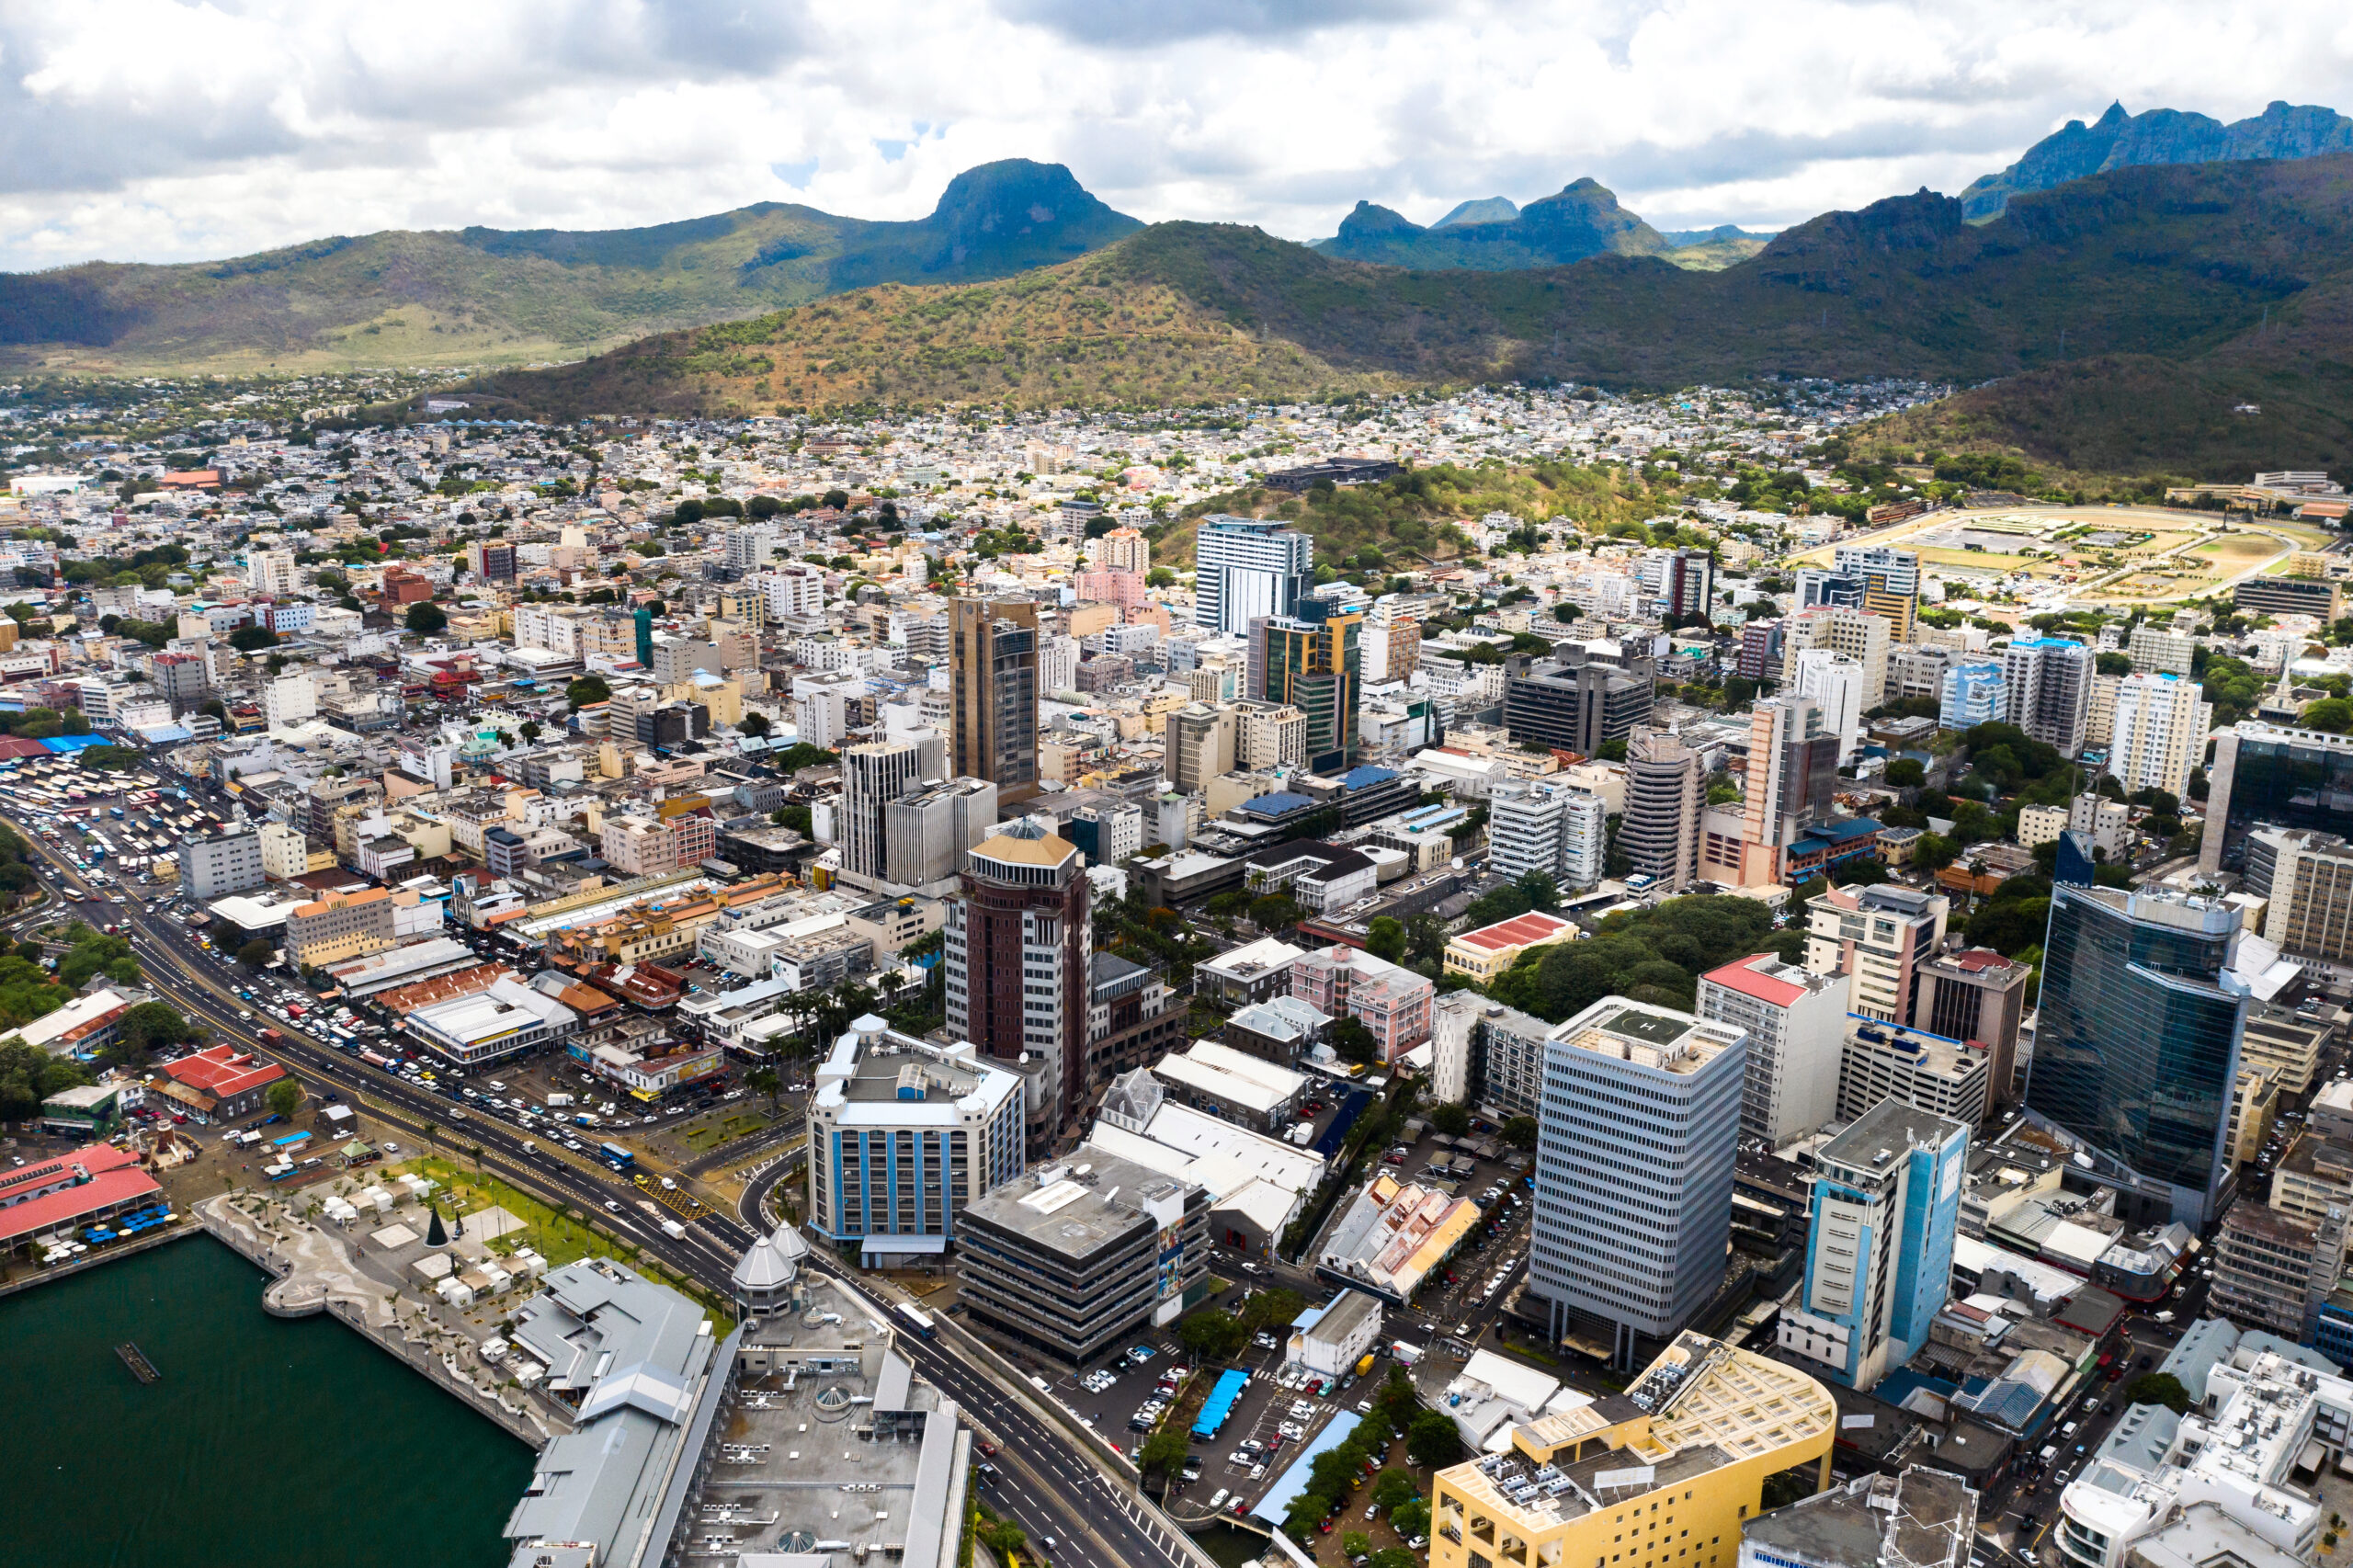 Aerial view of the city of Port-Louis, Mauritius, Africa.